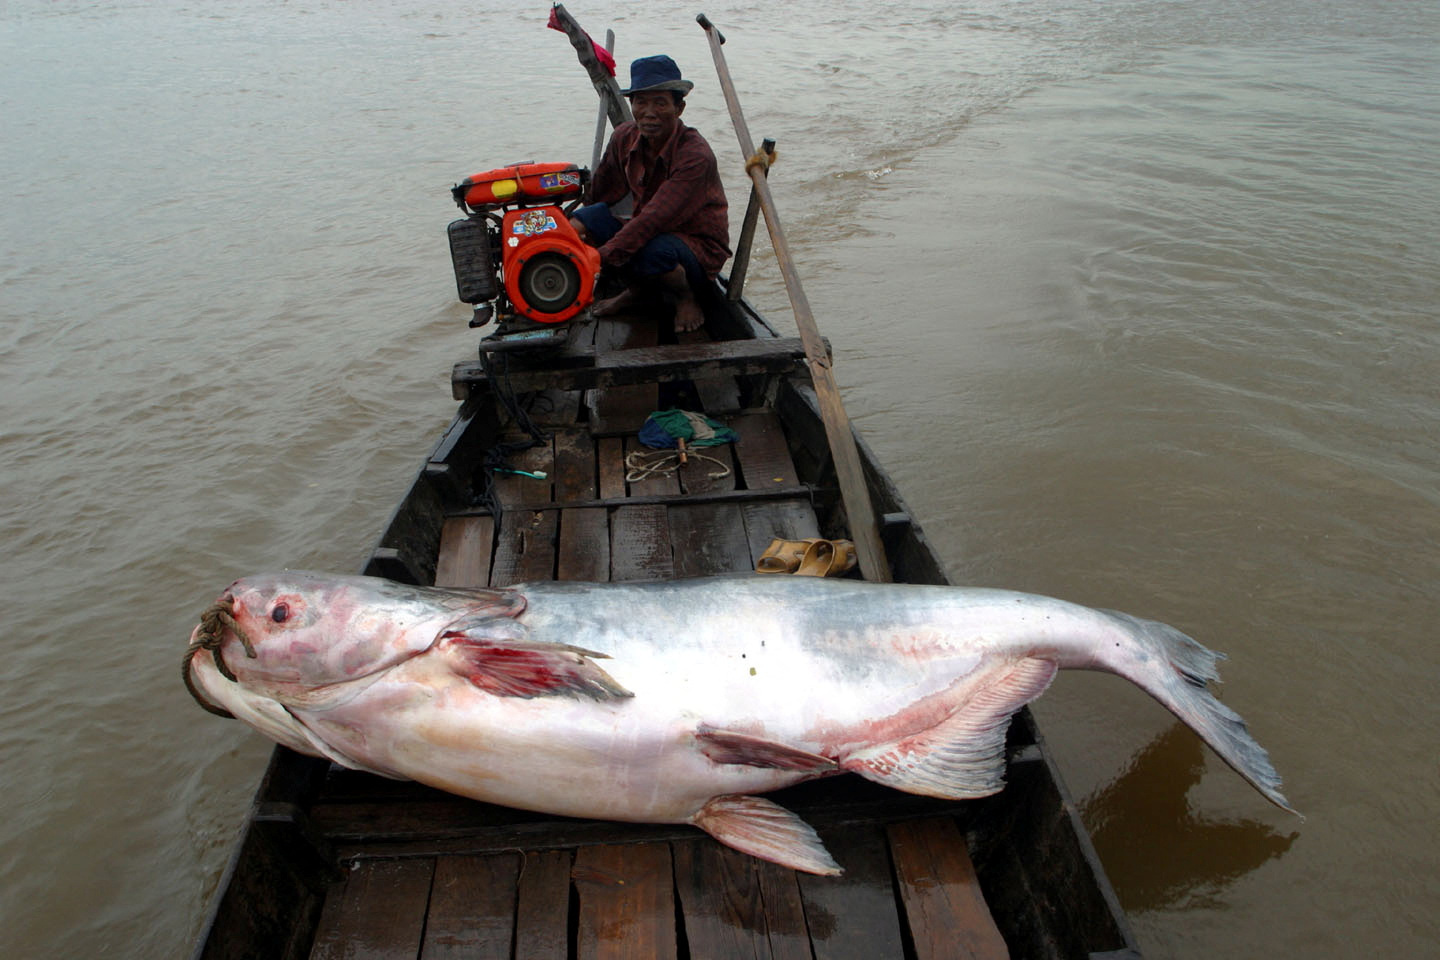 A Mekong giant catfish is seen on a boat in the Tonle Sap River